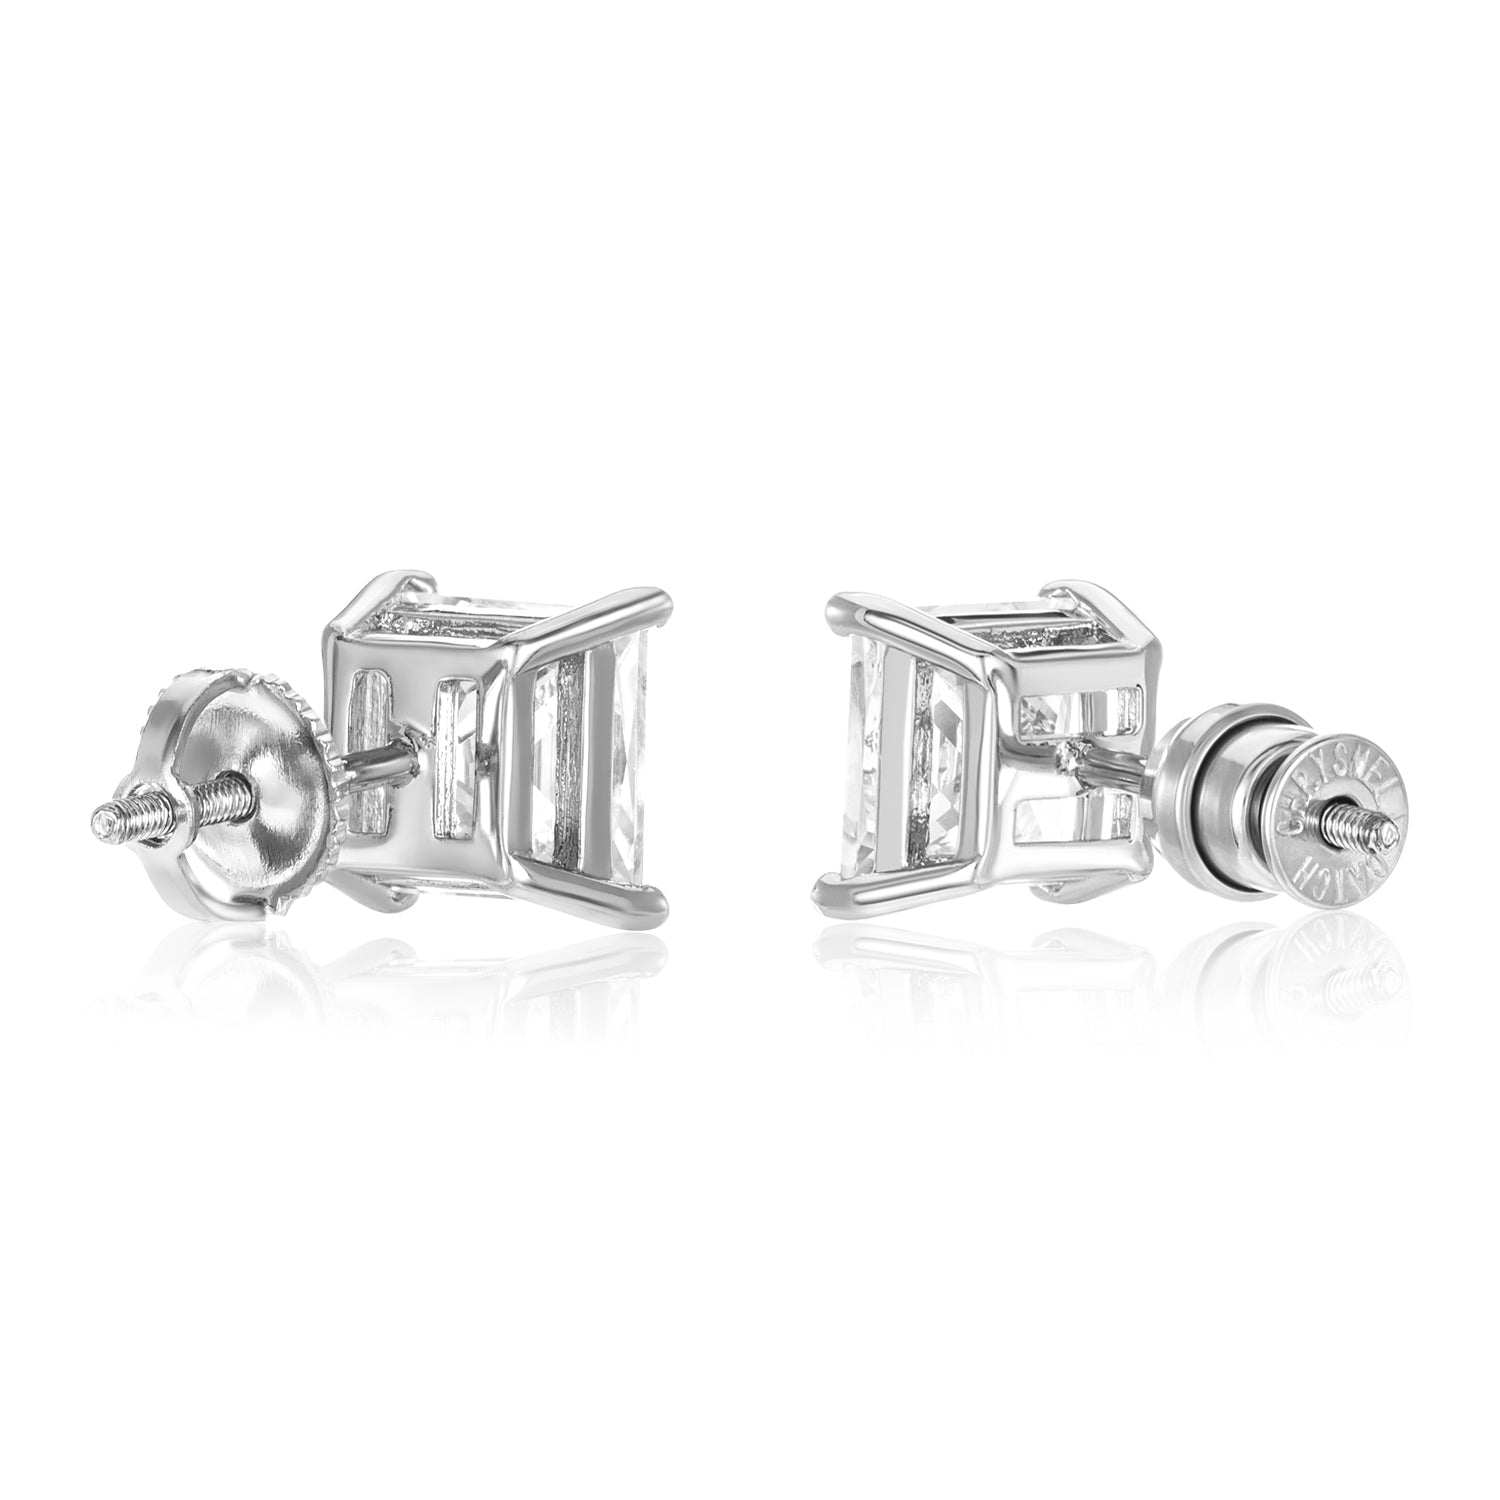 screwbacks on diamond stud earrings are hard to use, painful, and difficult to remove.  Chrysmela replaces screw backs and works beautifully on screw posts to protect your diamond stud earrings.